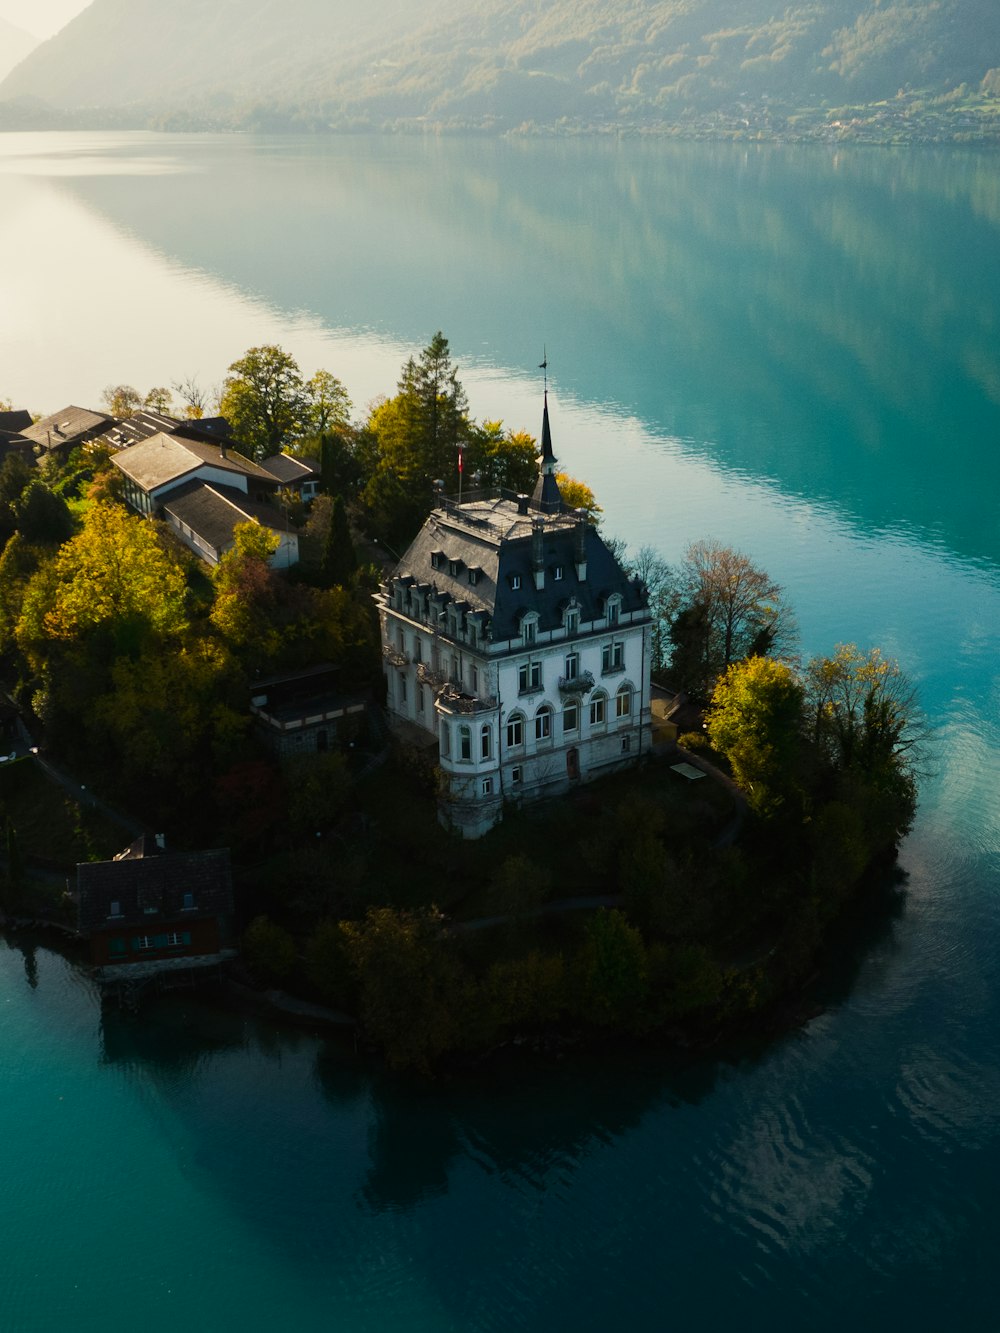 a building on a hill by a body of water